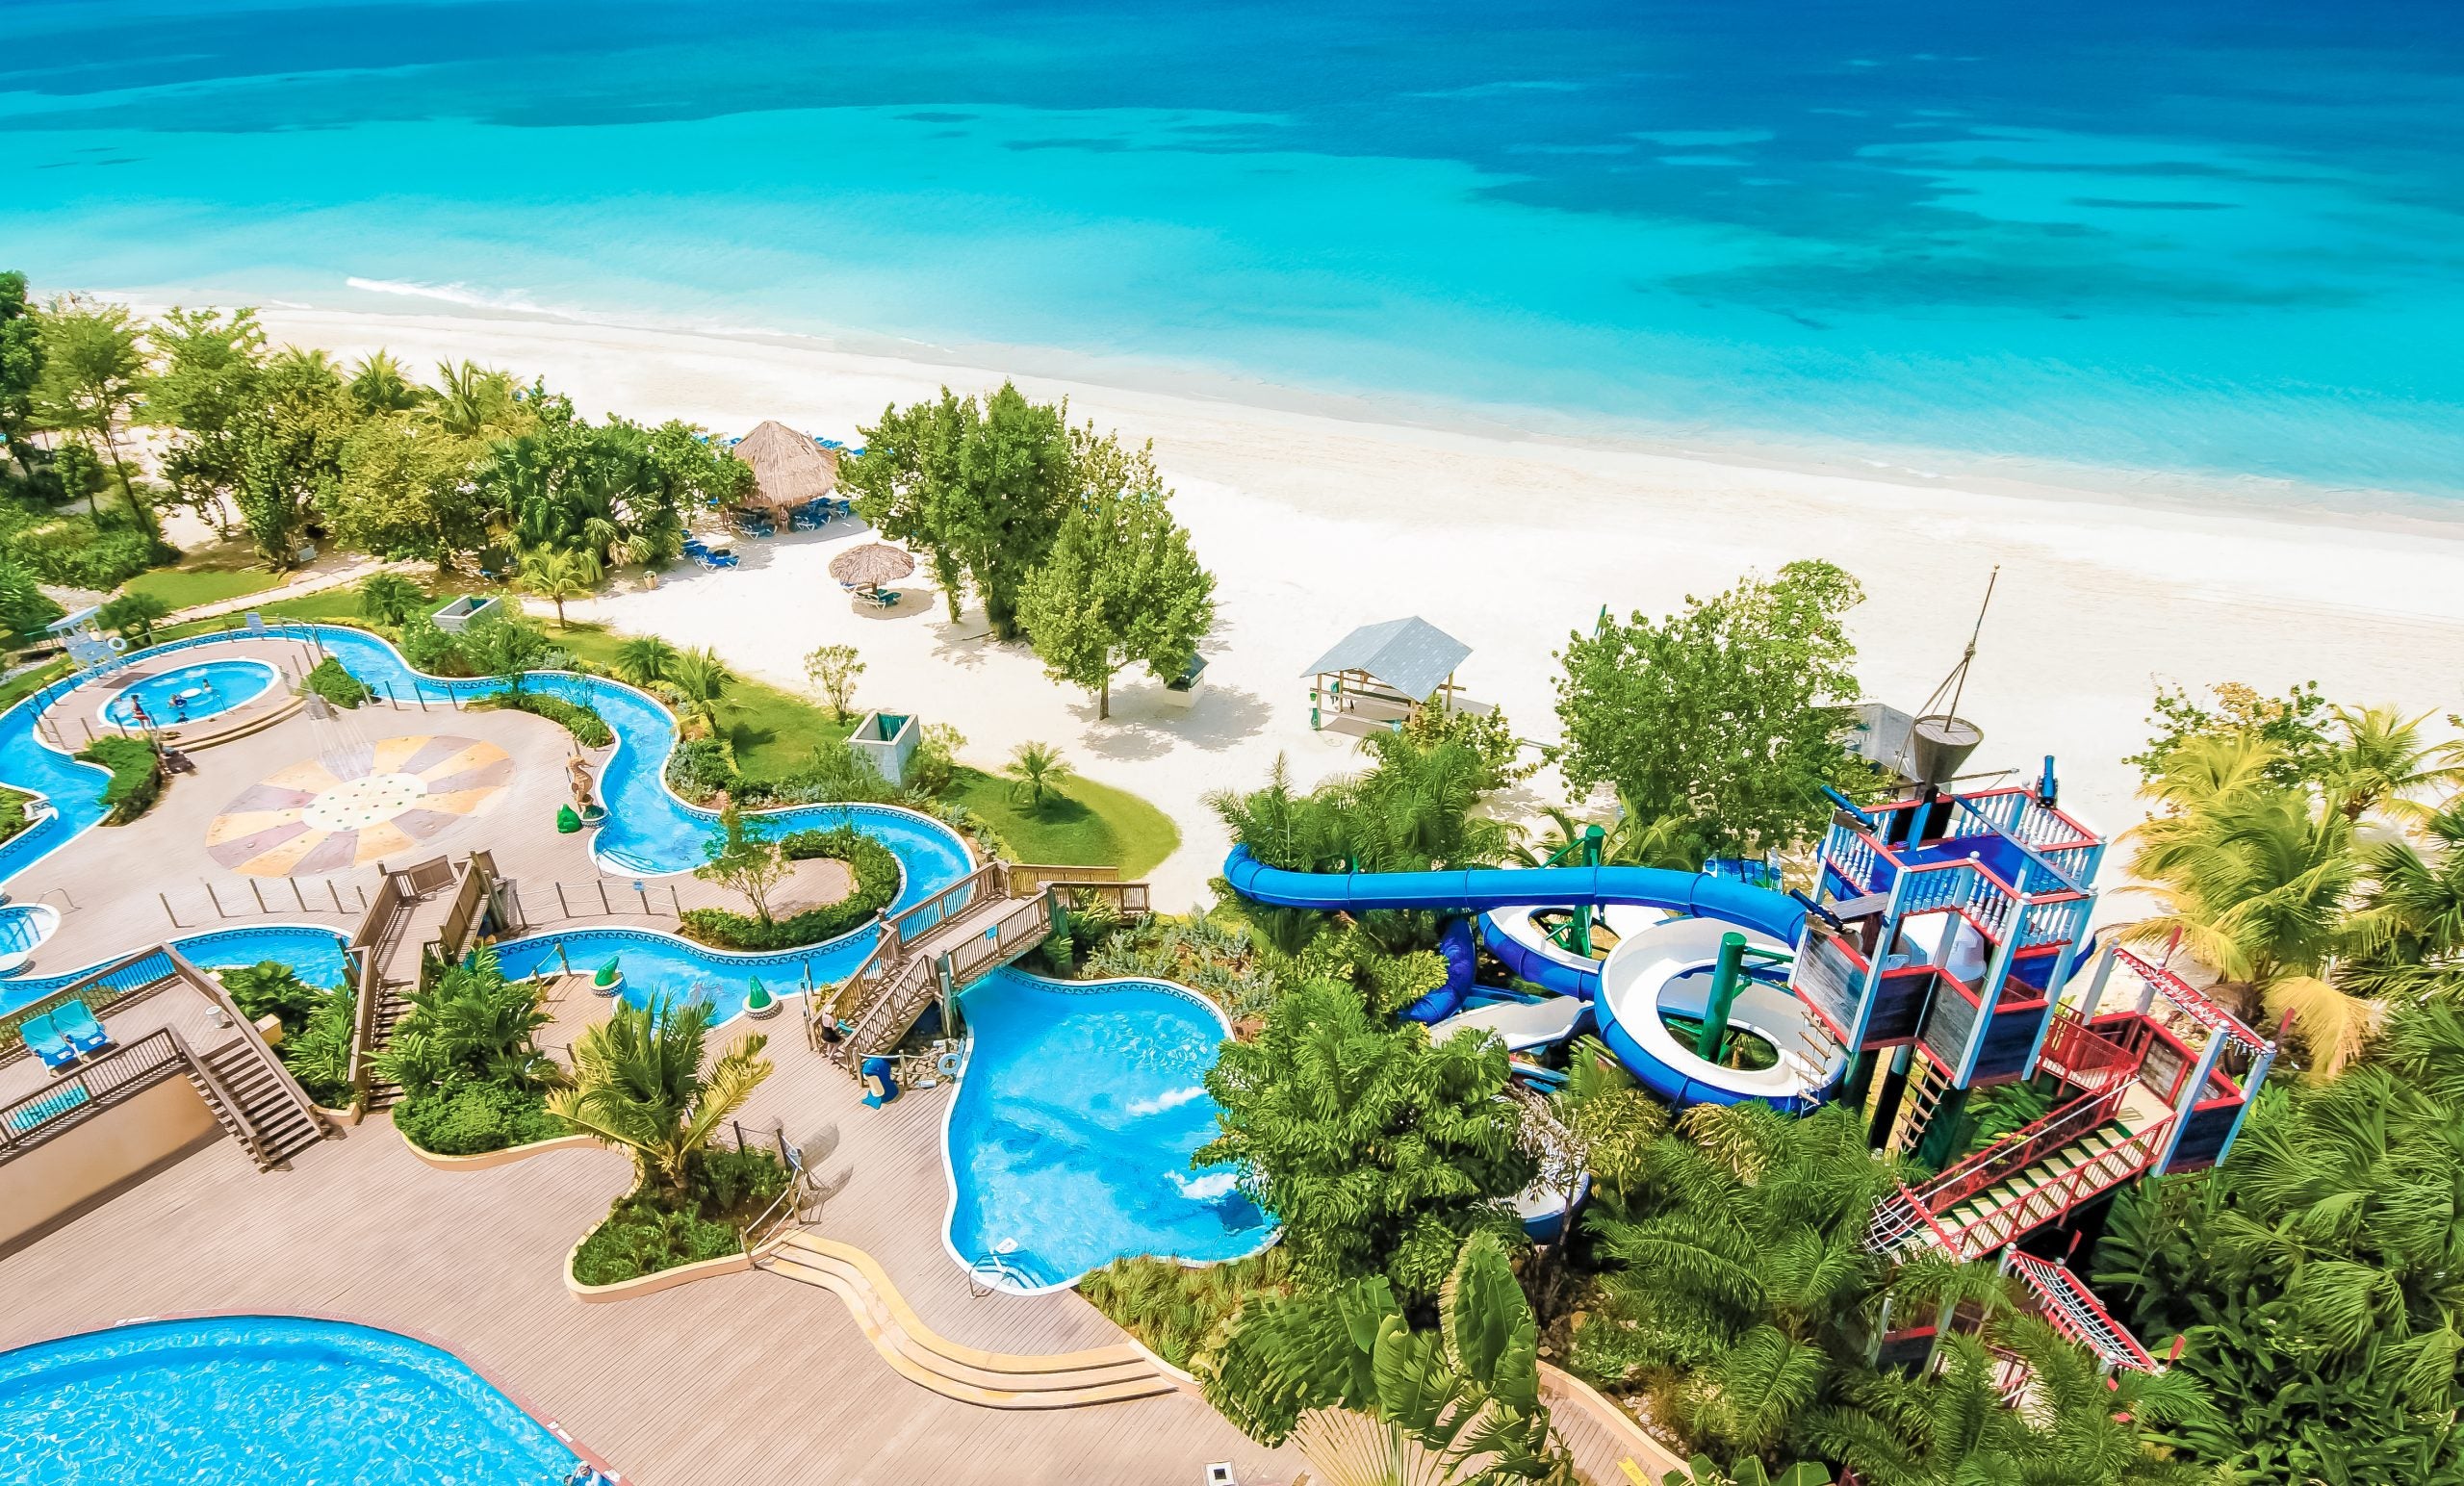 Is The Revamped Beaches Resort In Jamaica Worth A Trip?